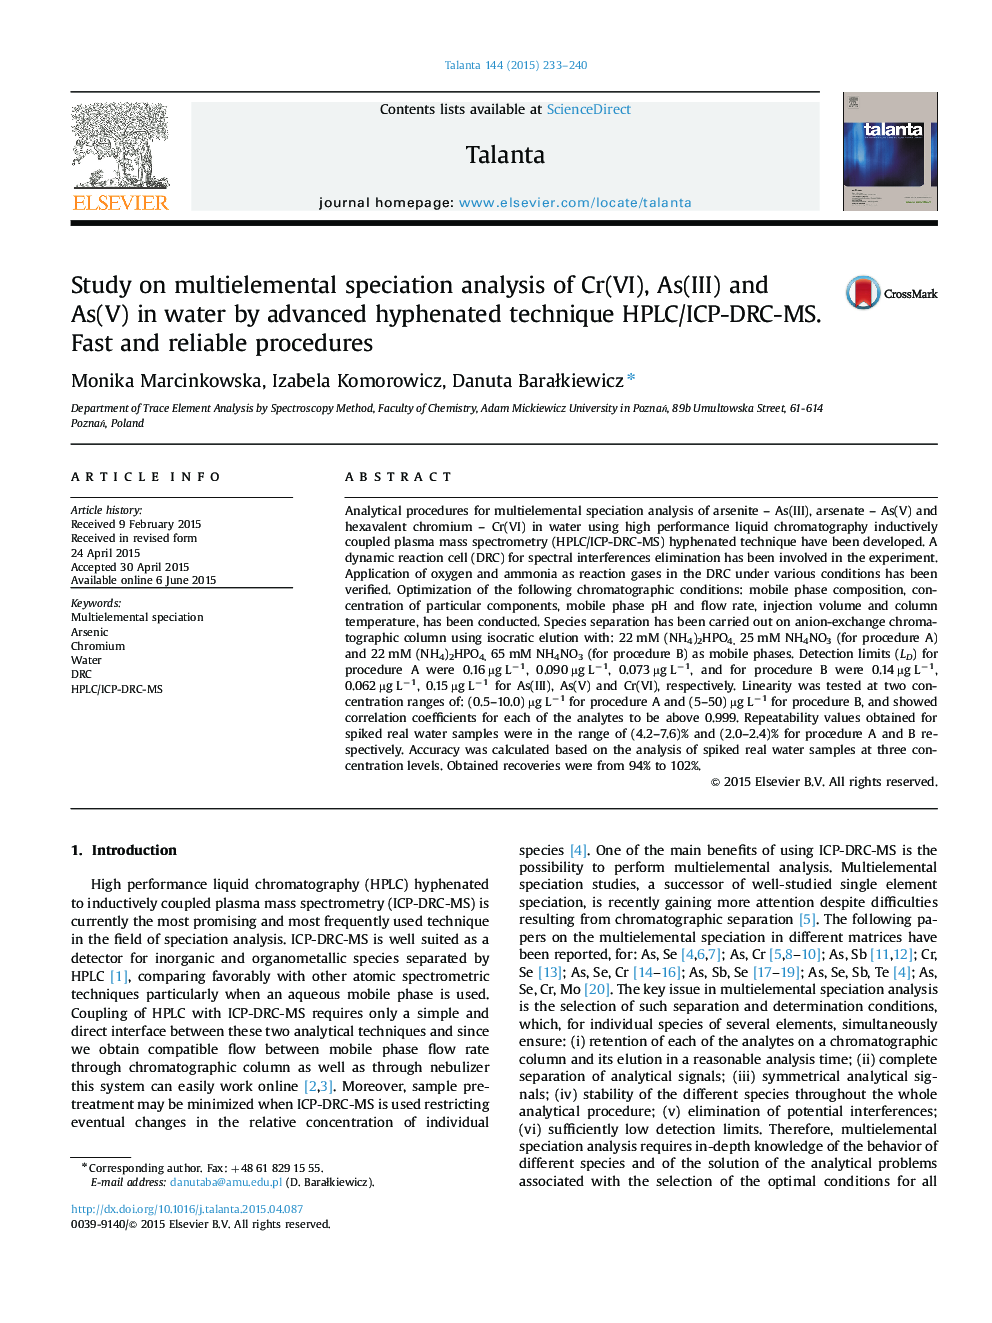 Study on multielemental speciation analysis of Cr(VI), As(III) and As(V) in water by advanced hyphenated technique HPLC/ICP-DRC-MS. Fast and reliable procedures